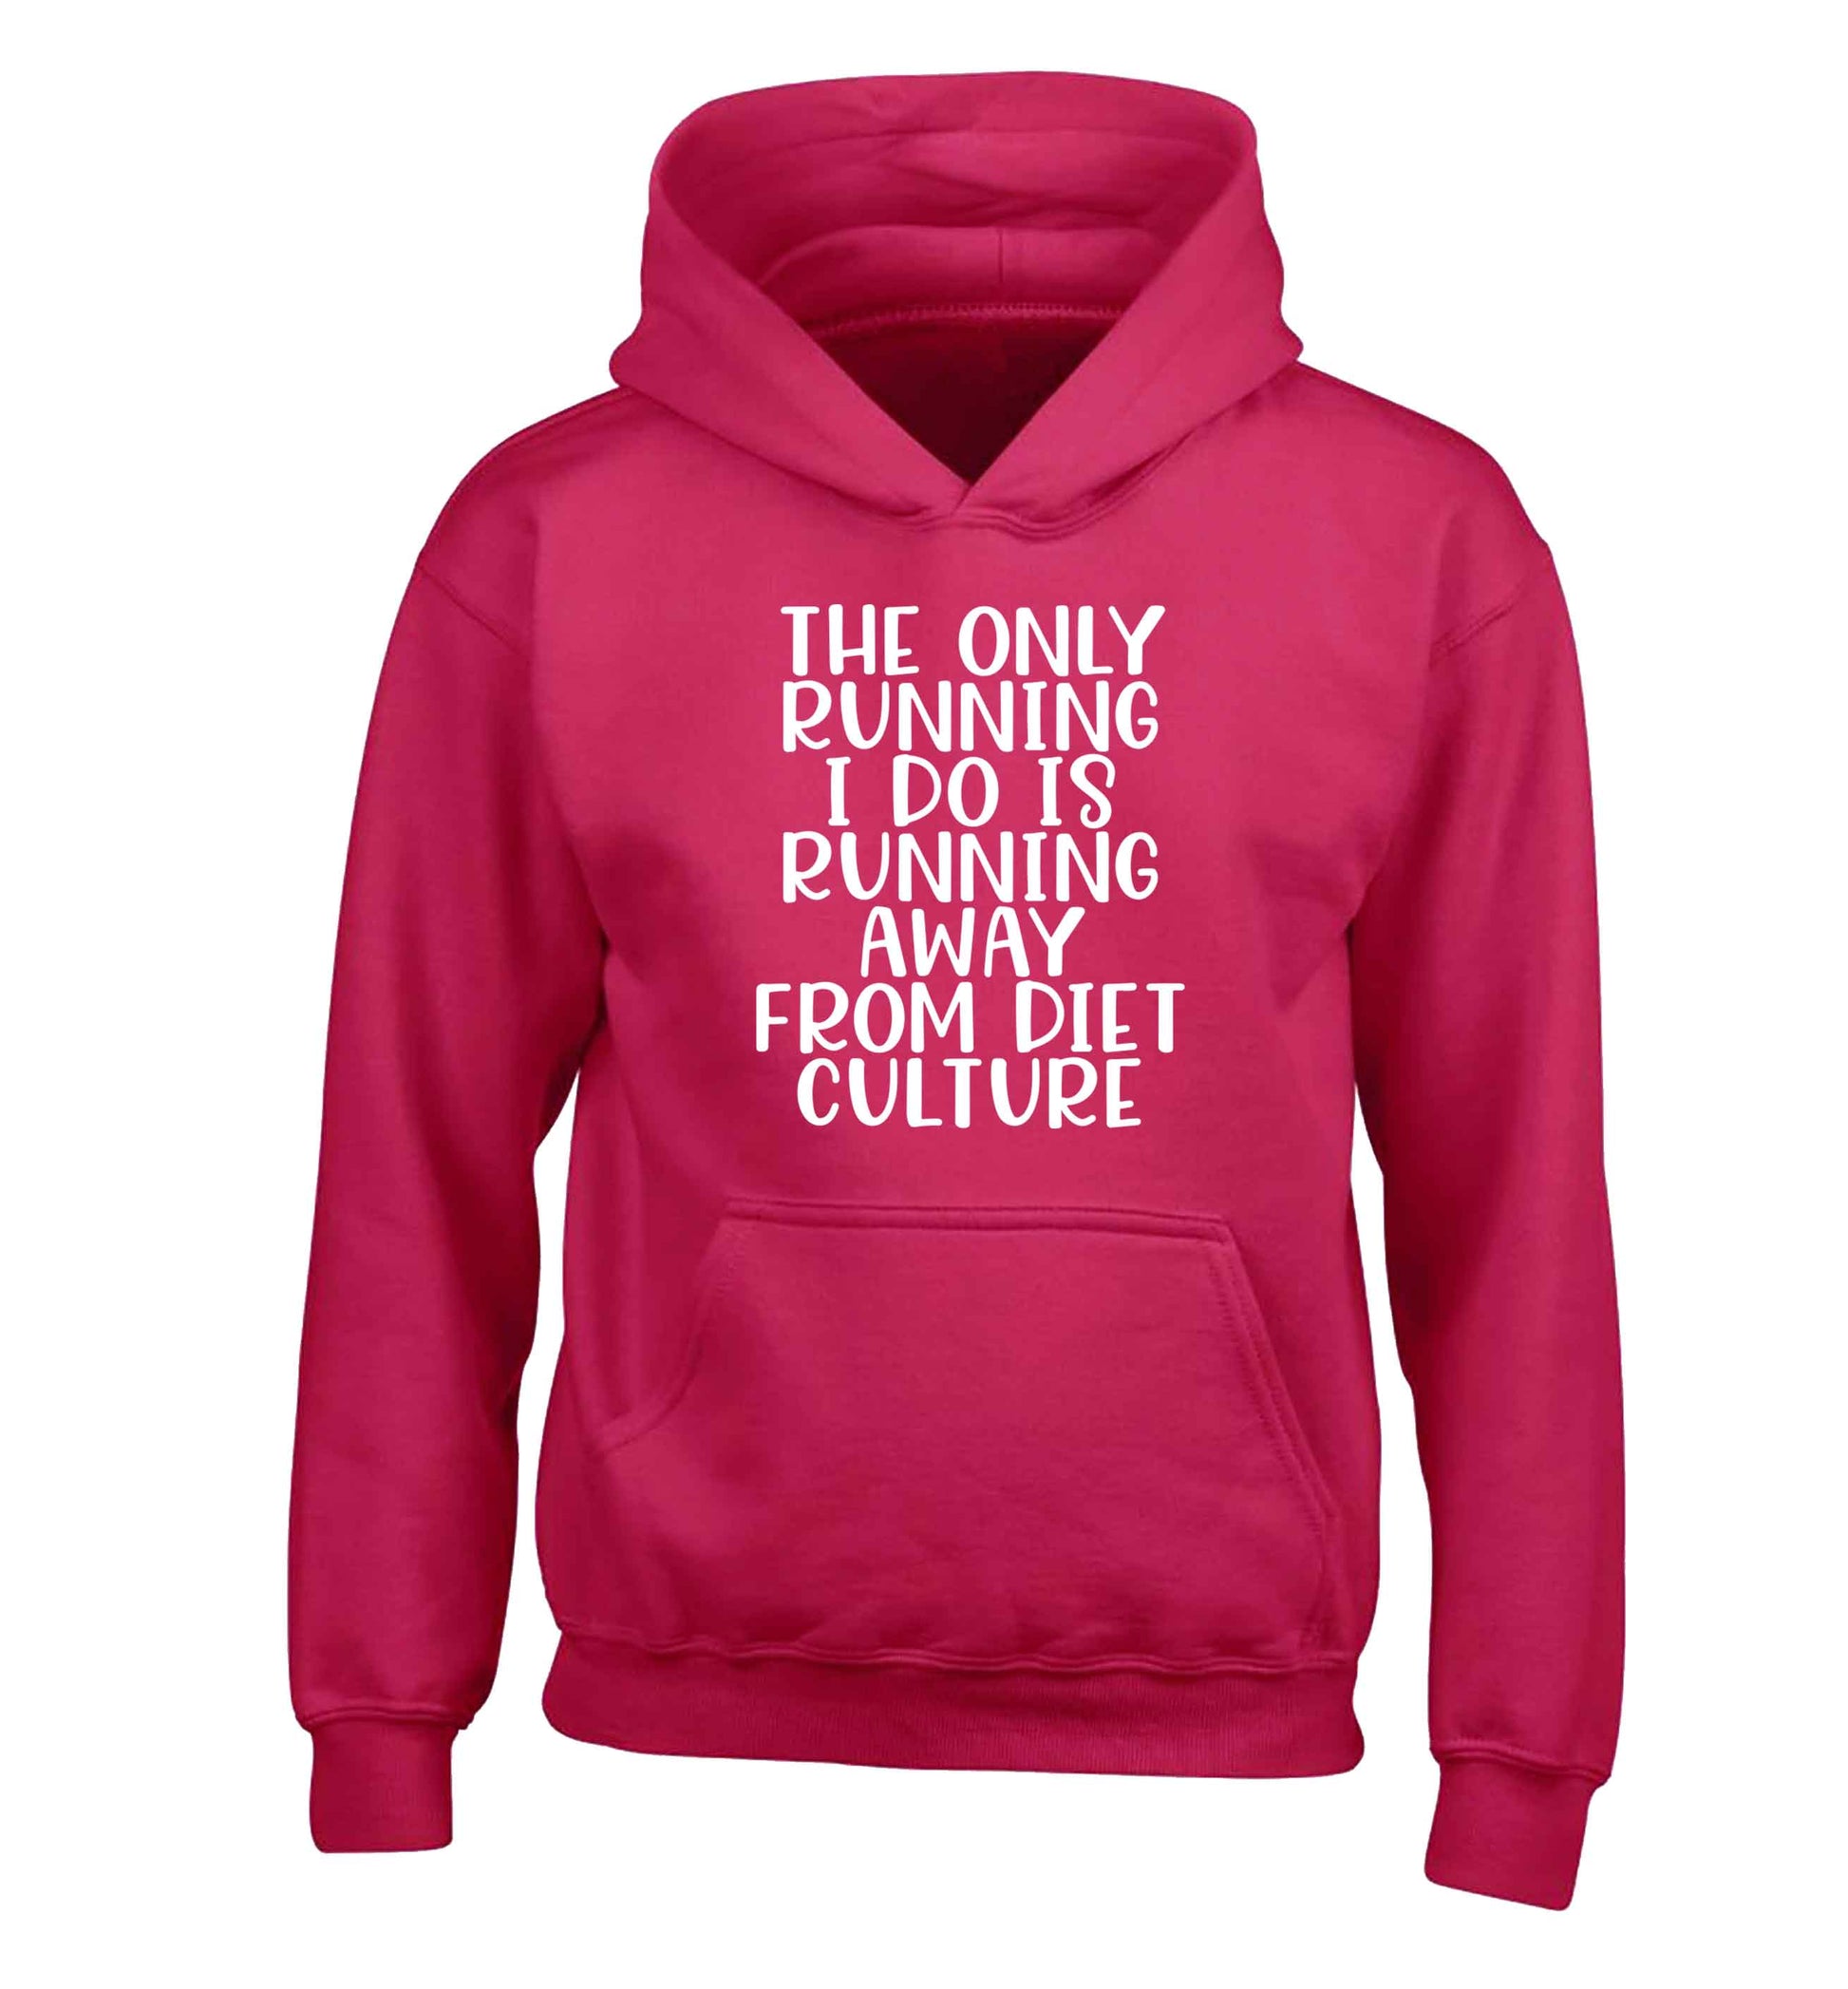 The only running I do is running away from diet culture children's pink hoodie 12-13 Years